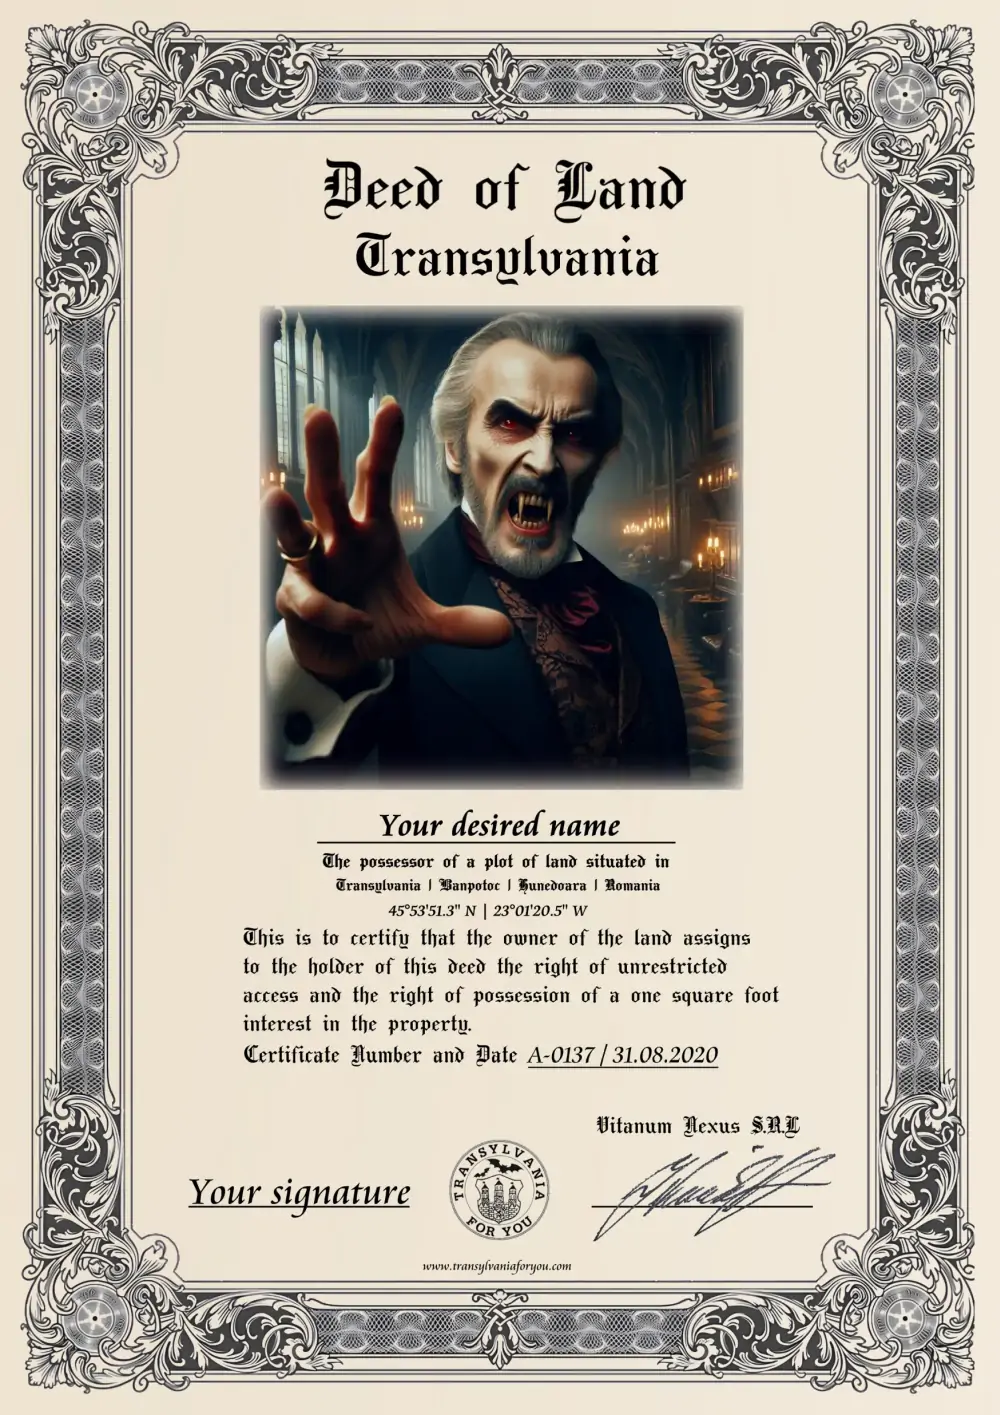 Image on the deed: Count Dracula, Christopher Lee